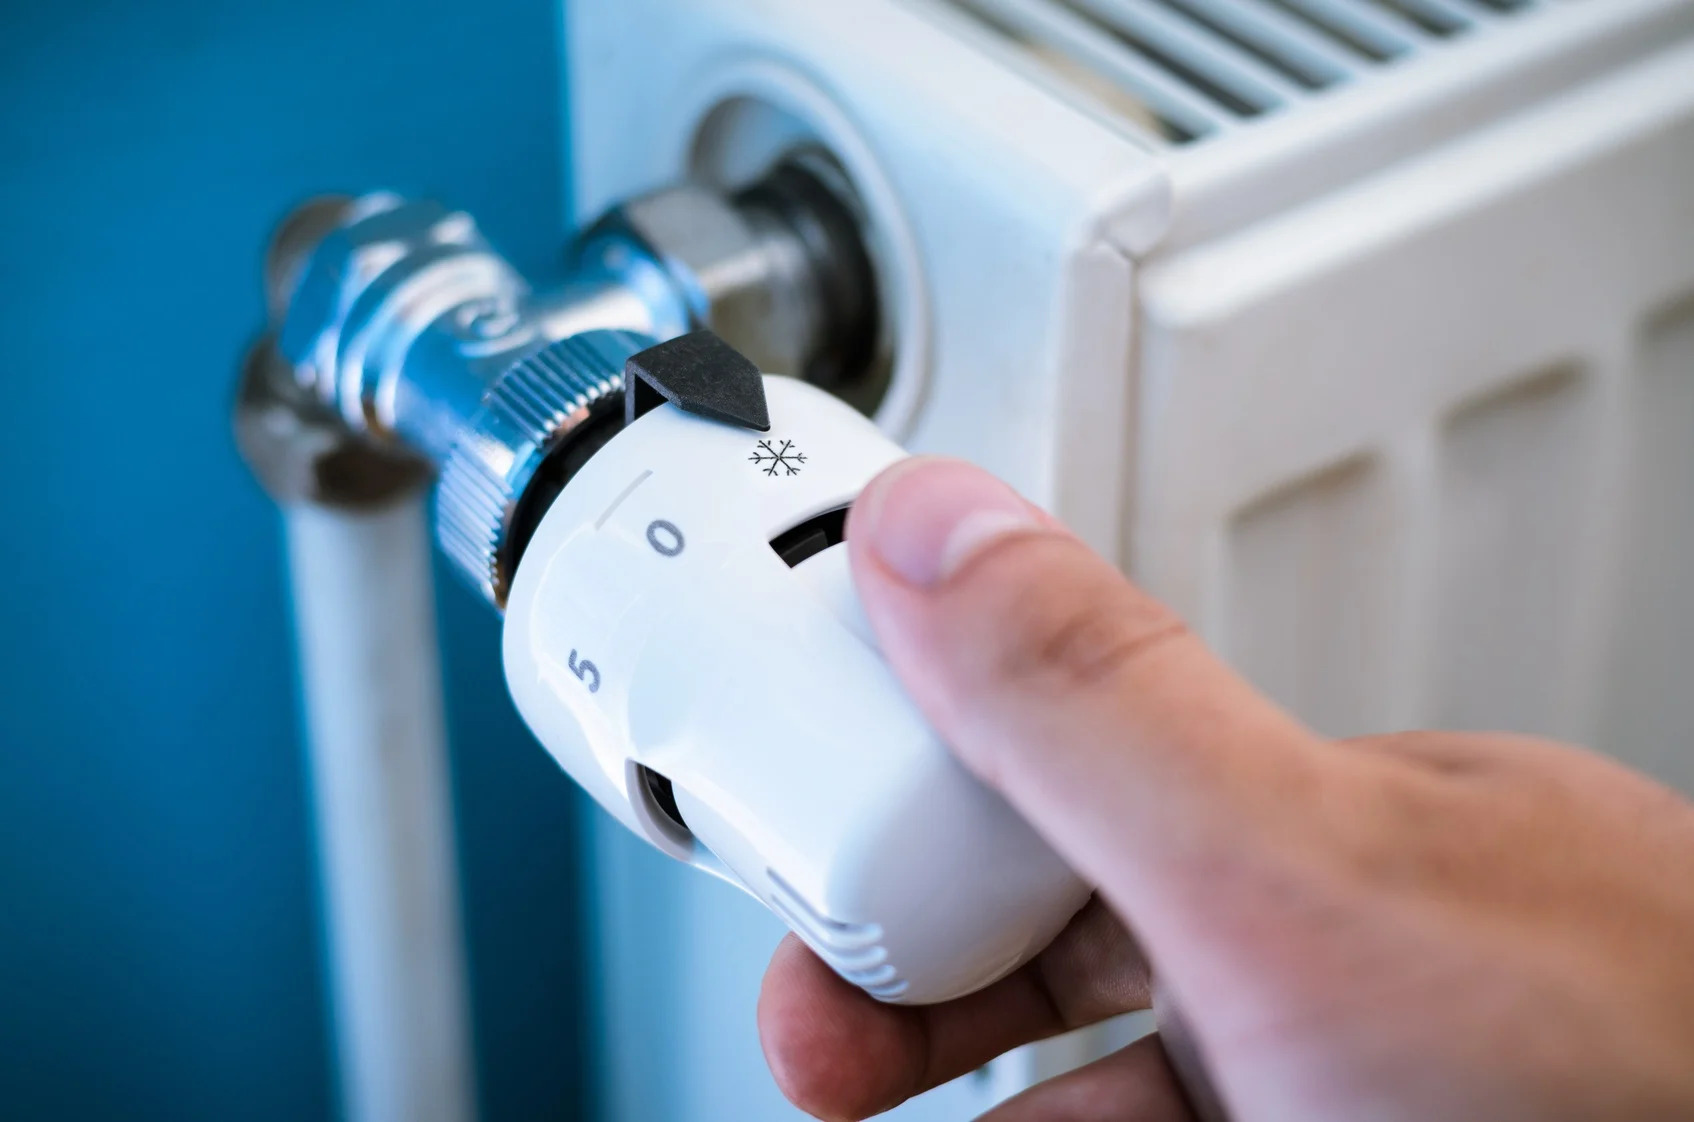 How To Turn On A Water Heater